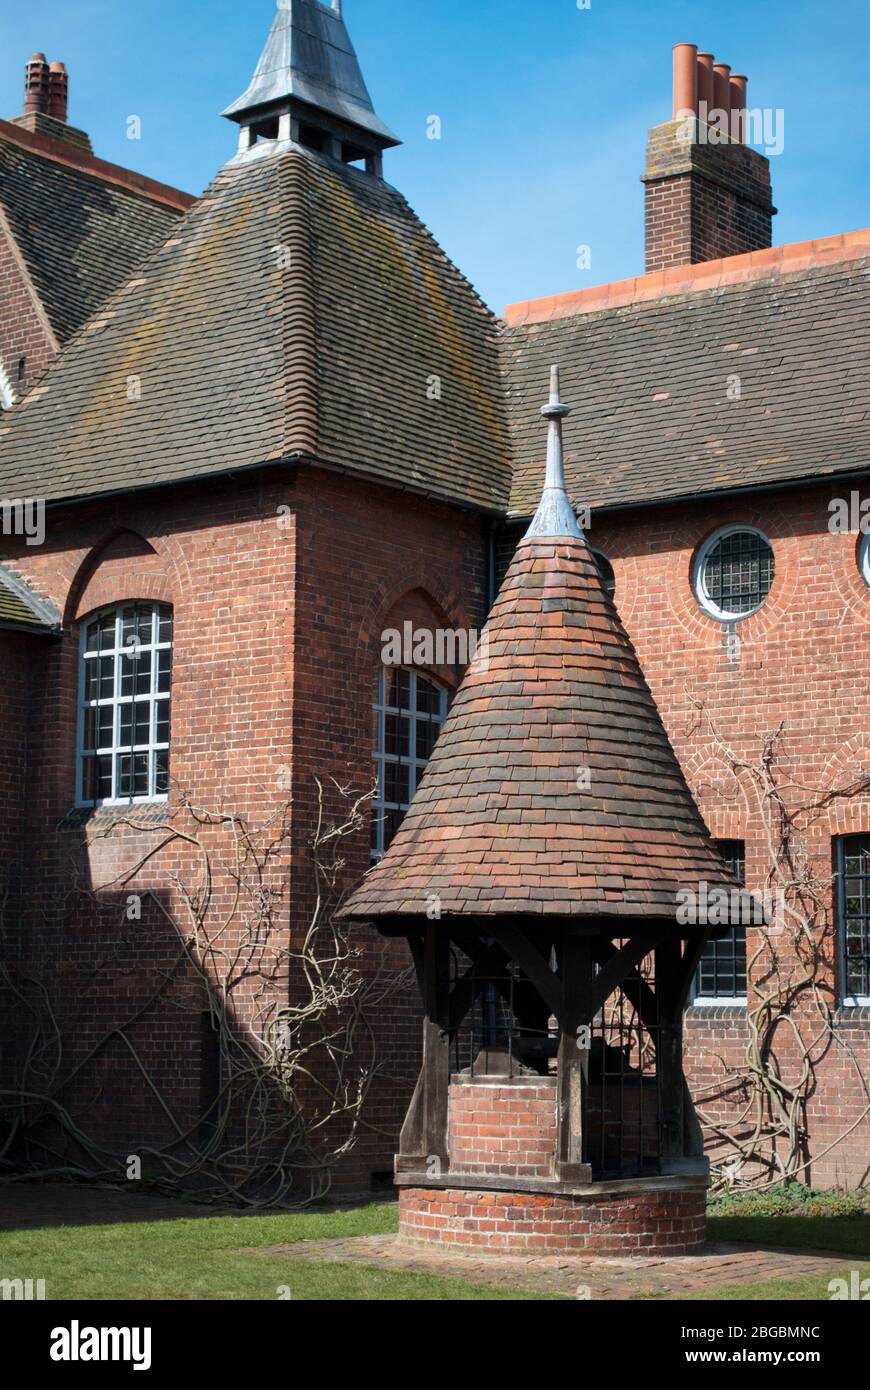 Arts Architecture 1850s English House The Red House, Red Lane, Bexleyheath, Borough of Bexley DA7 by Philip Webb William Morris Stock Photo - Alamy